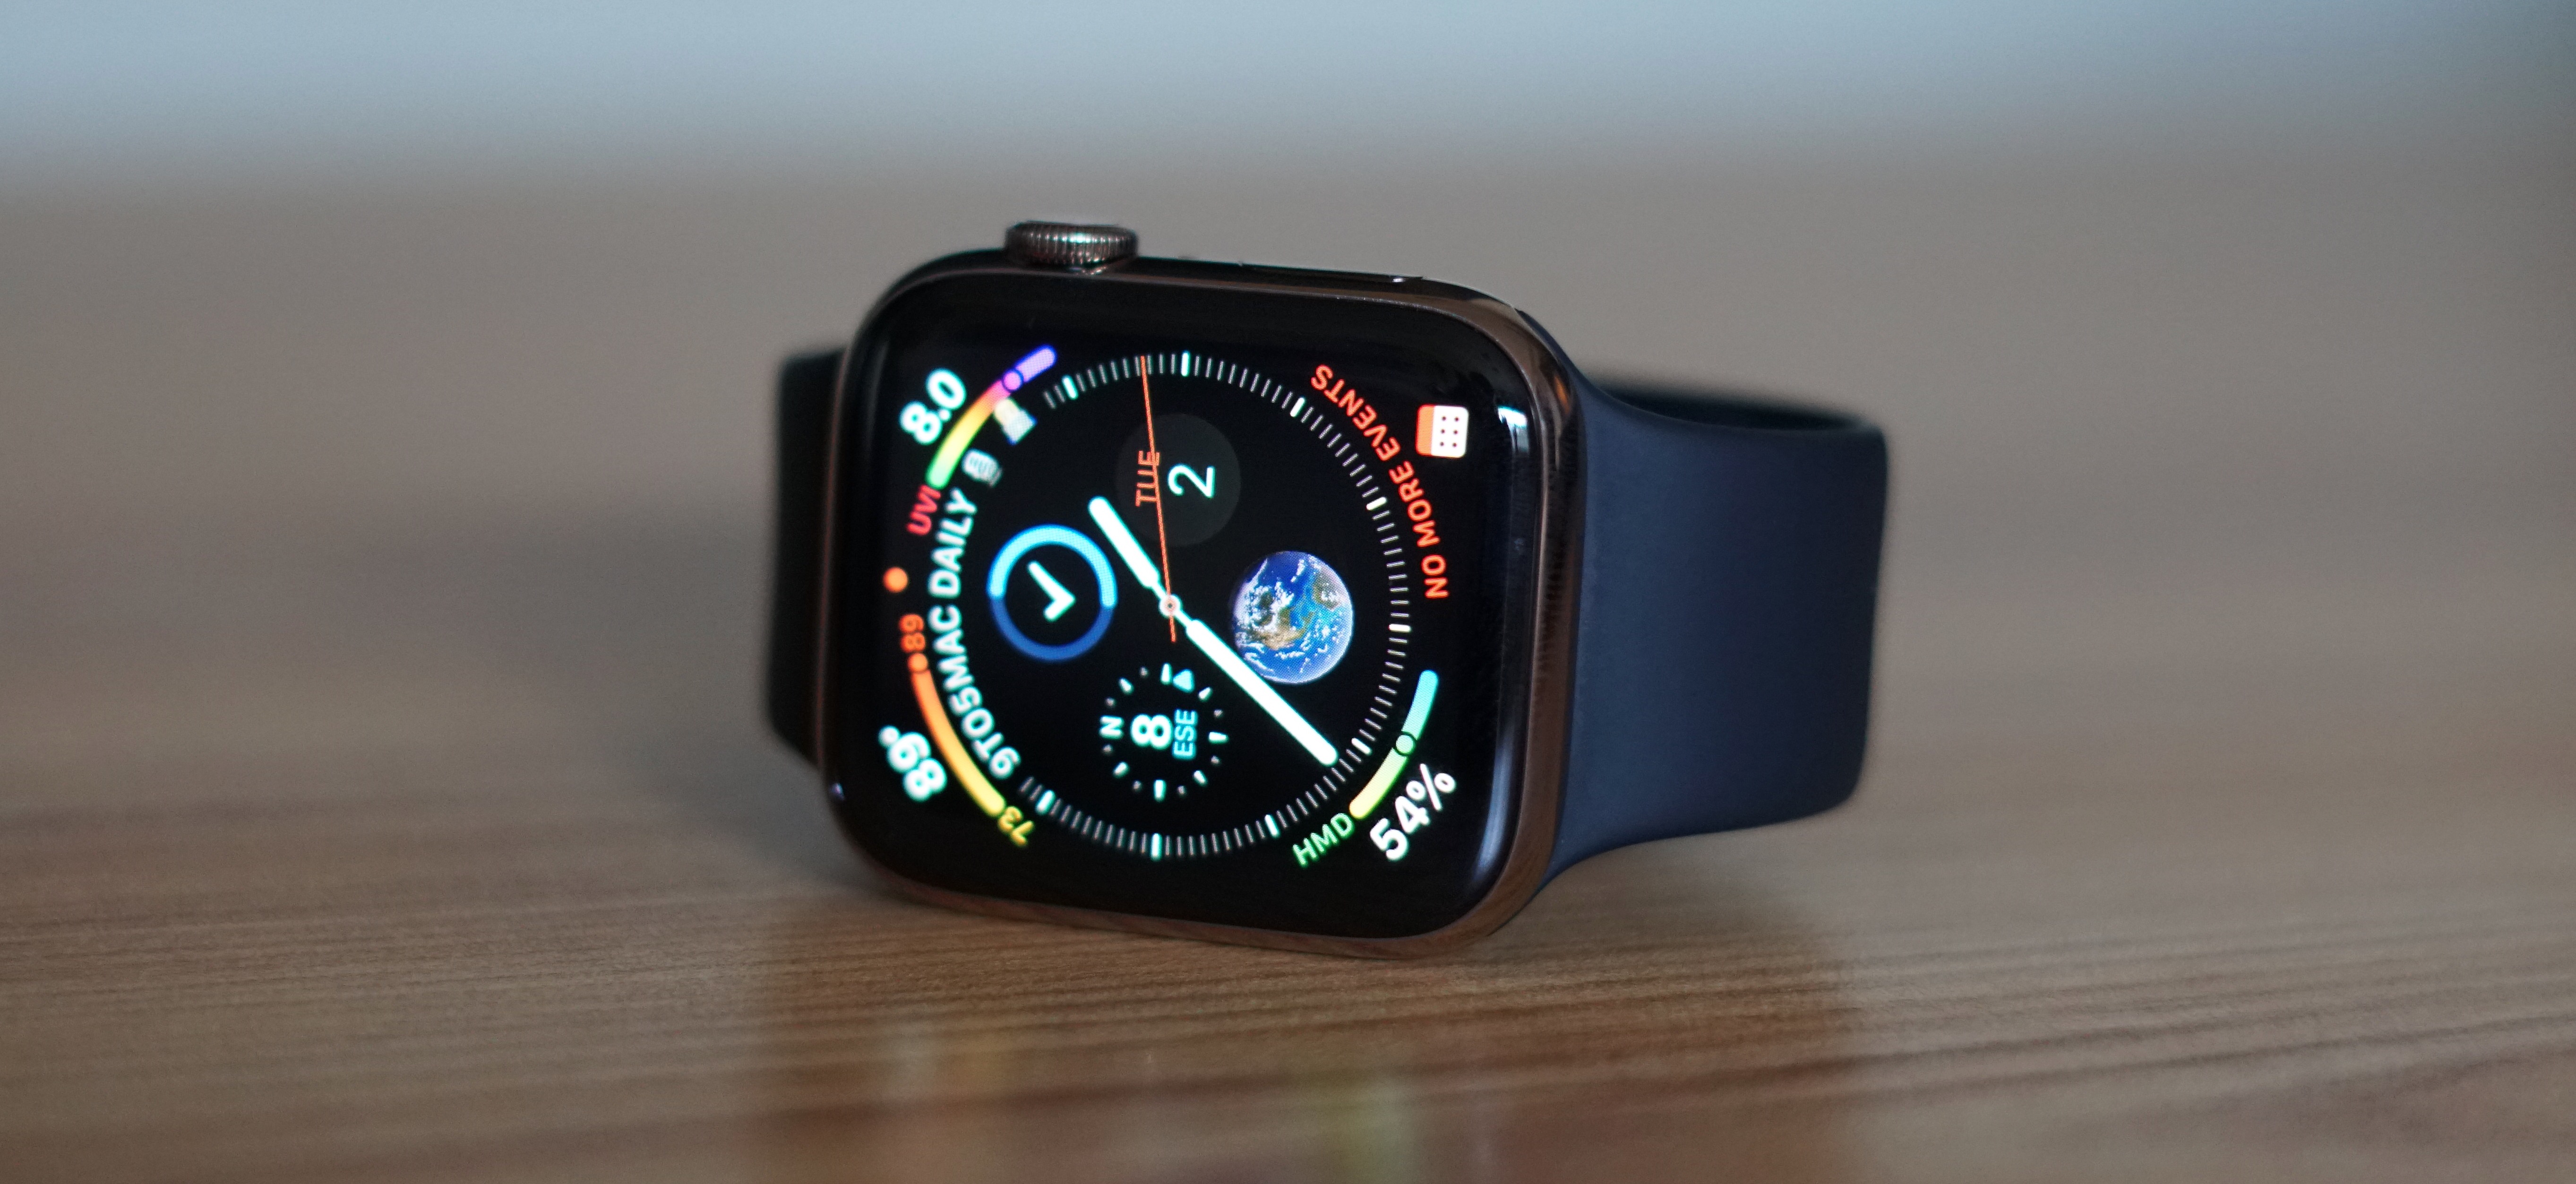 apple watch series 4 44mm features